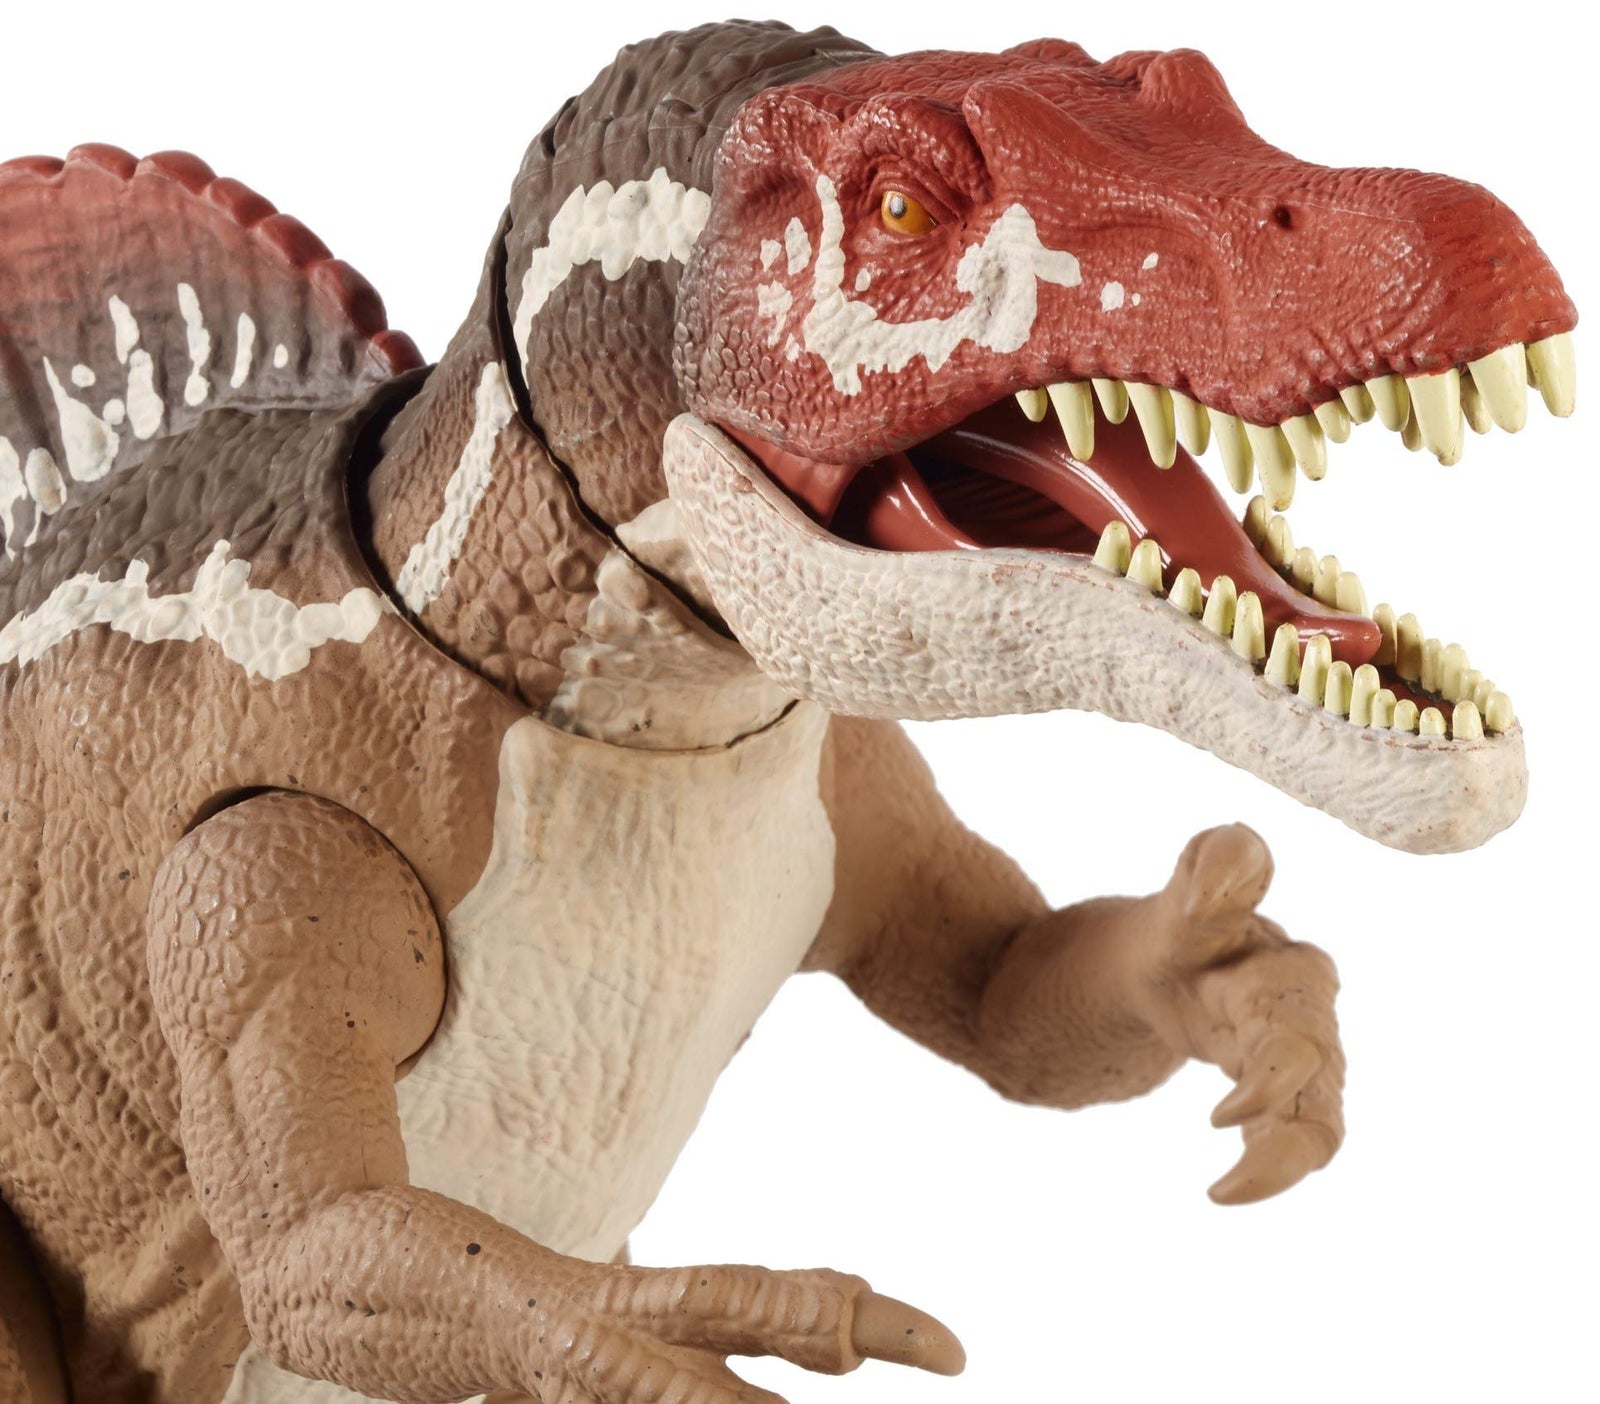 Jurassic World Extreme Chompin' Spinosaurus Dinosaur Action Figure, Huge Bite, Authentic Decoration, Movable Joints, Ages 4 Years Old & Up